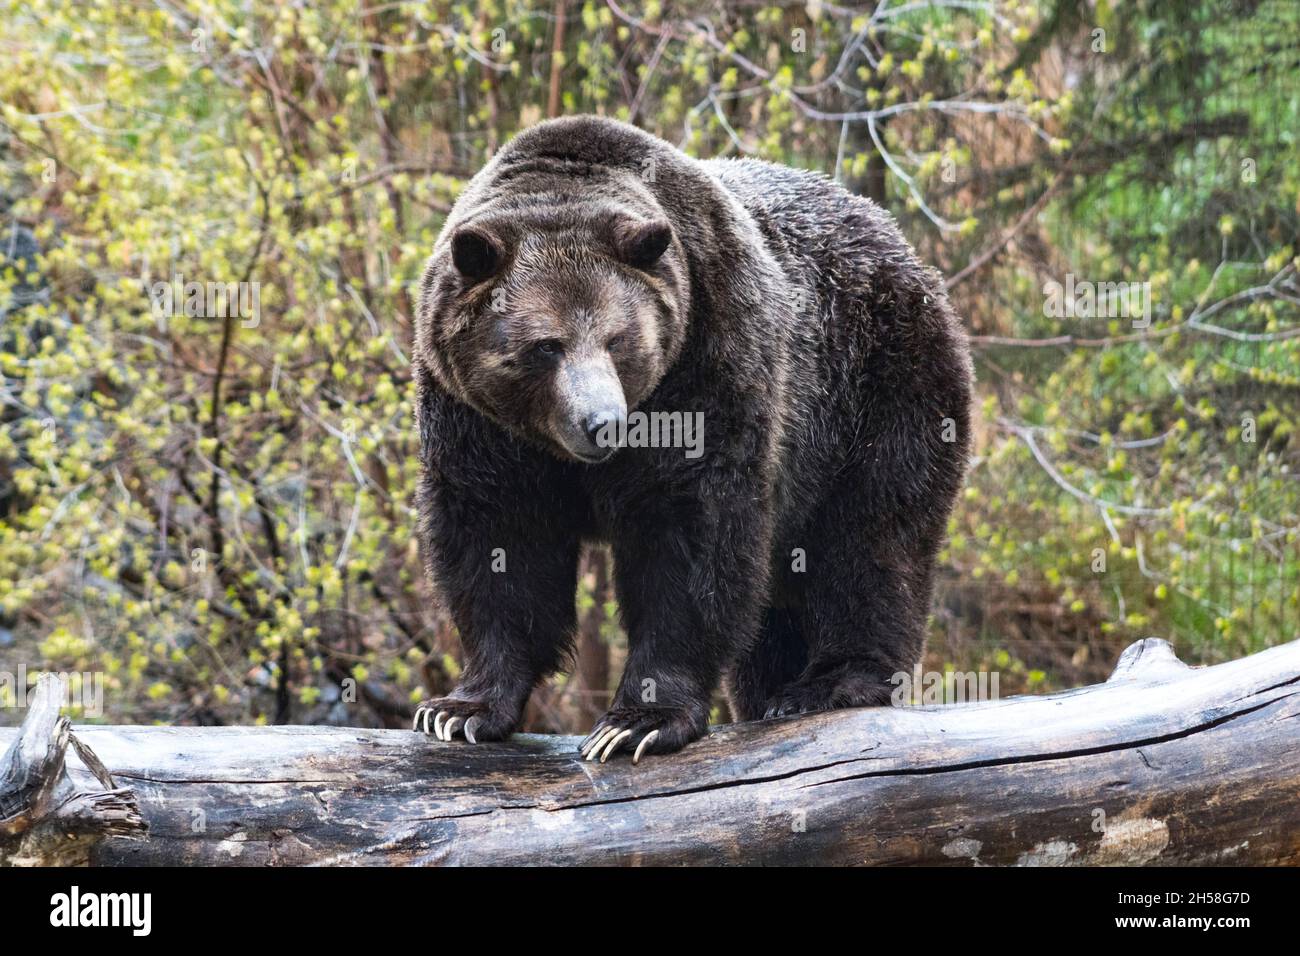 Grizzly bear standing on log in rain, facing towards camera with head down, full body, trees in background Stock Photo